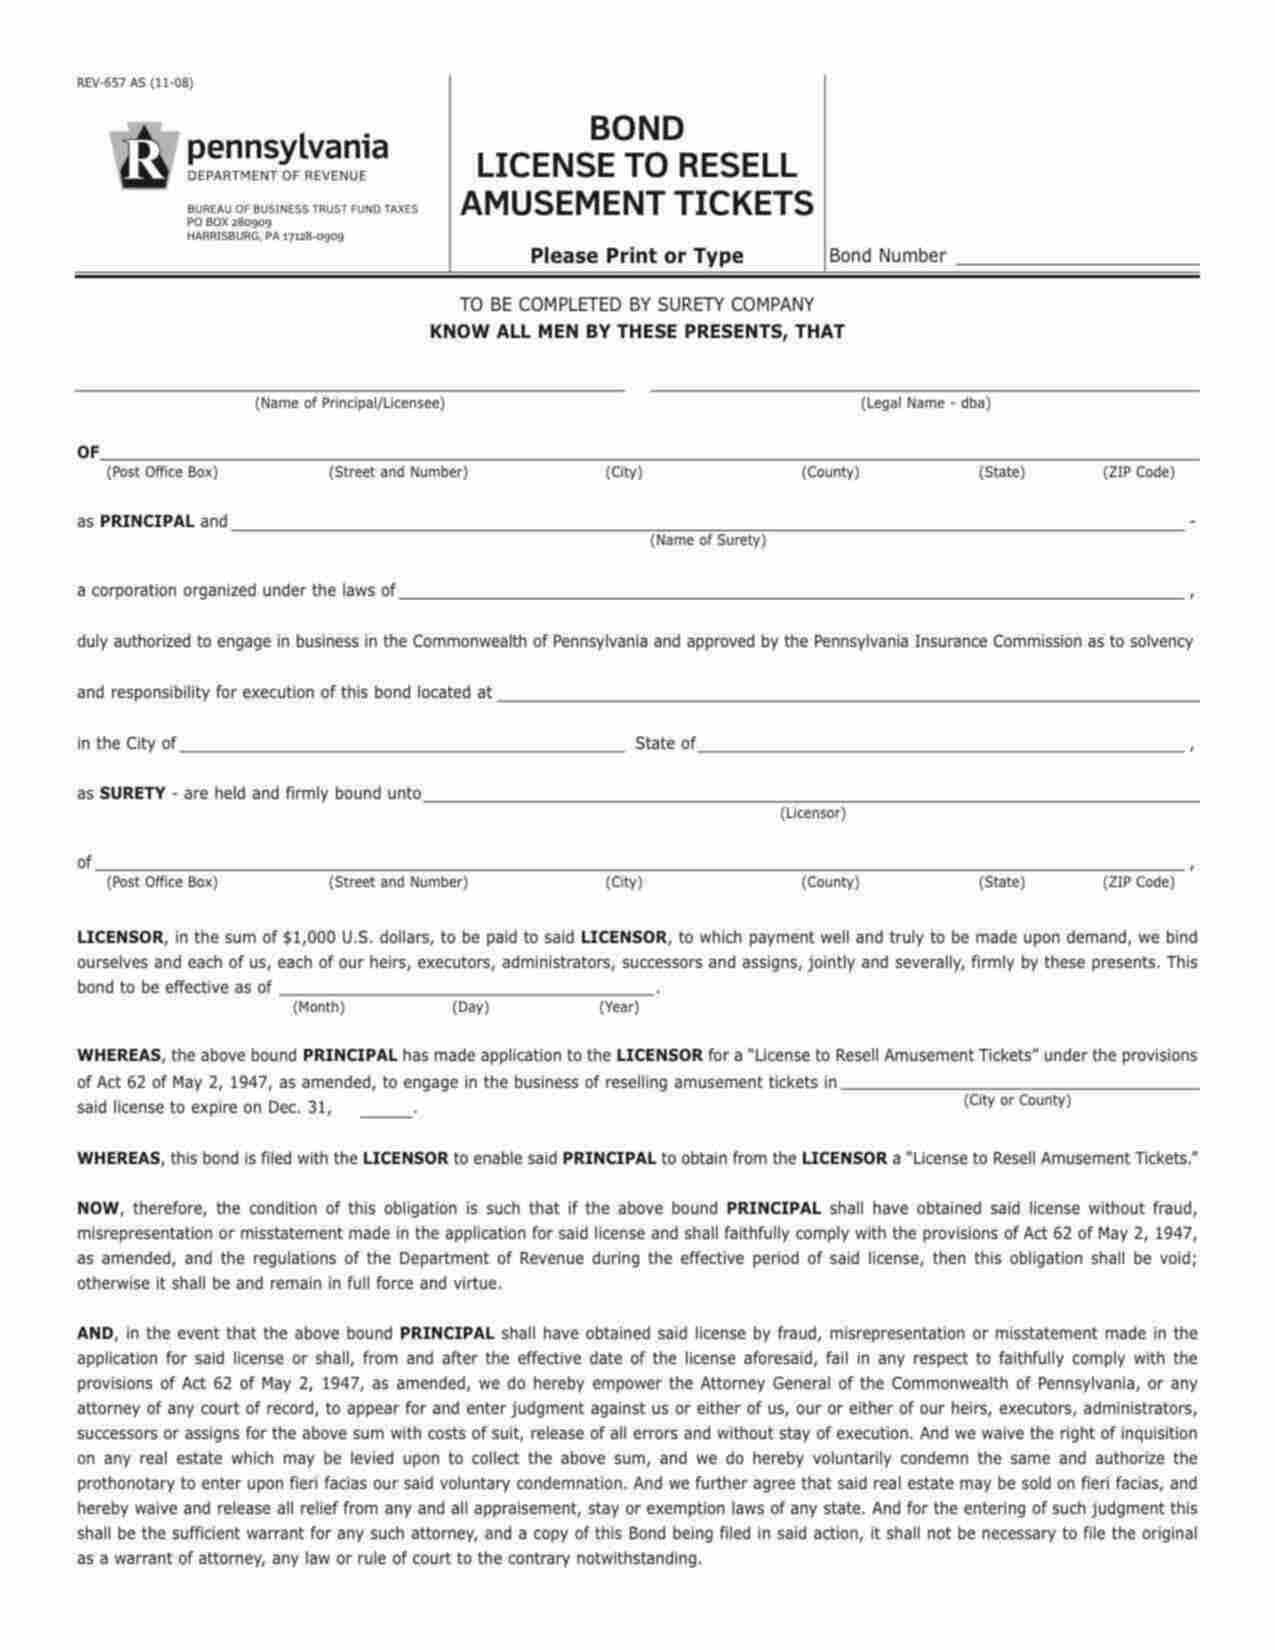 Pennsylvania License to Resell Amusement Tickets Bond Form